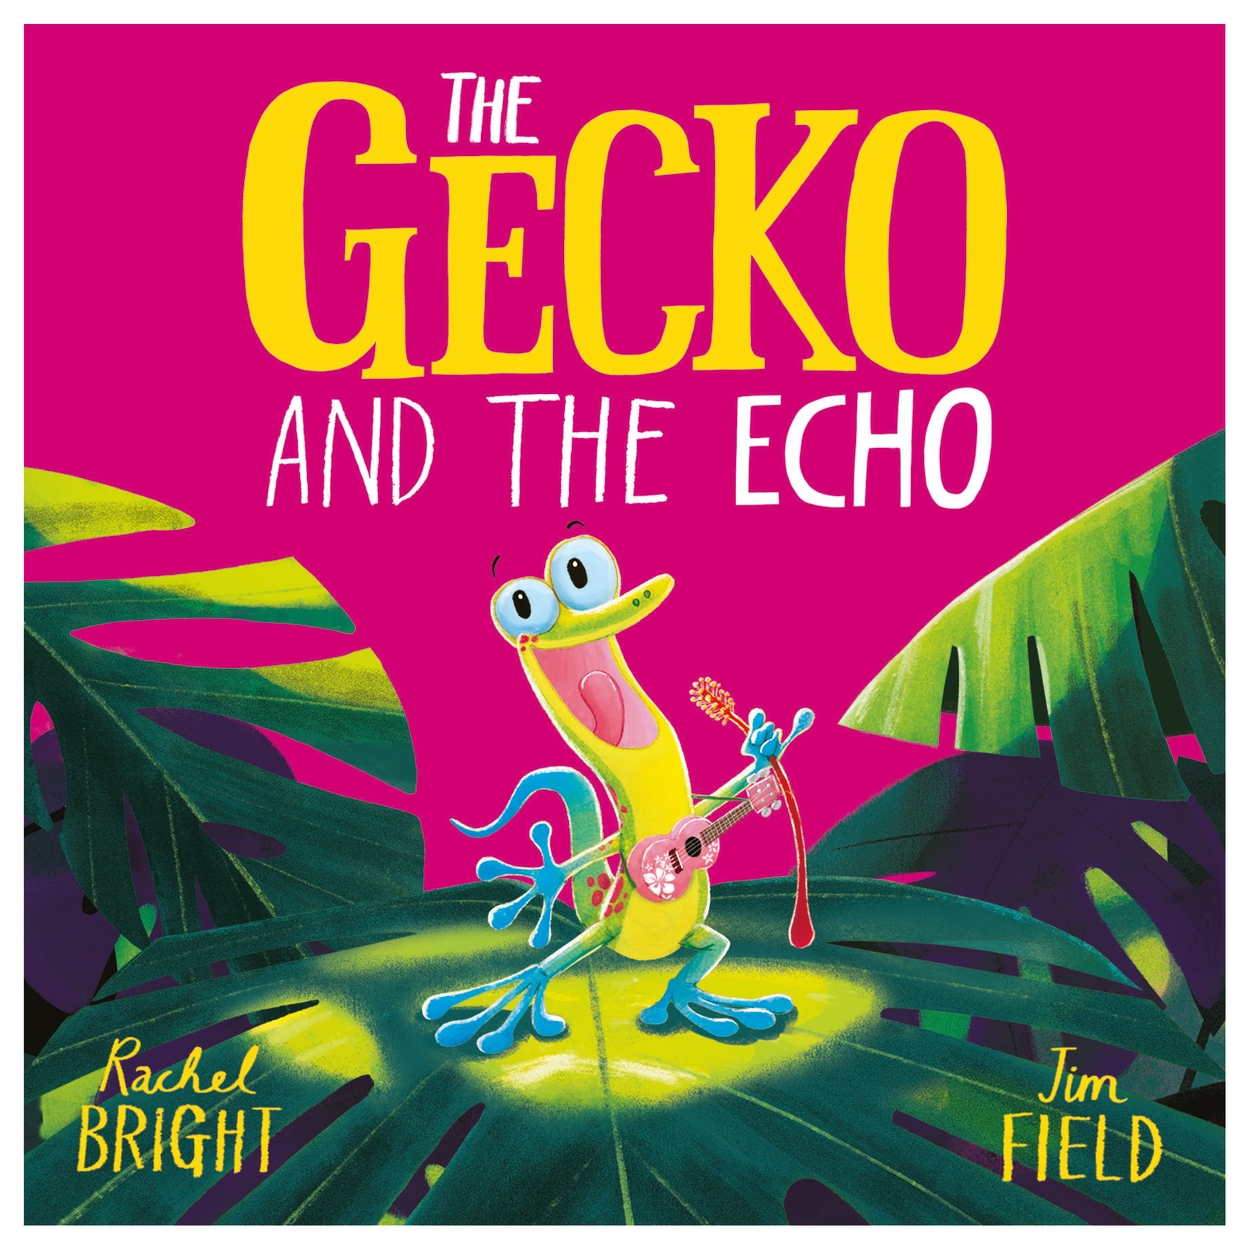 The Gecko and the Echo by Jim Field | Hachette UK